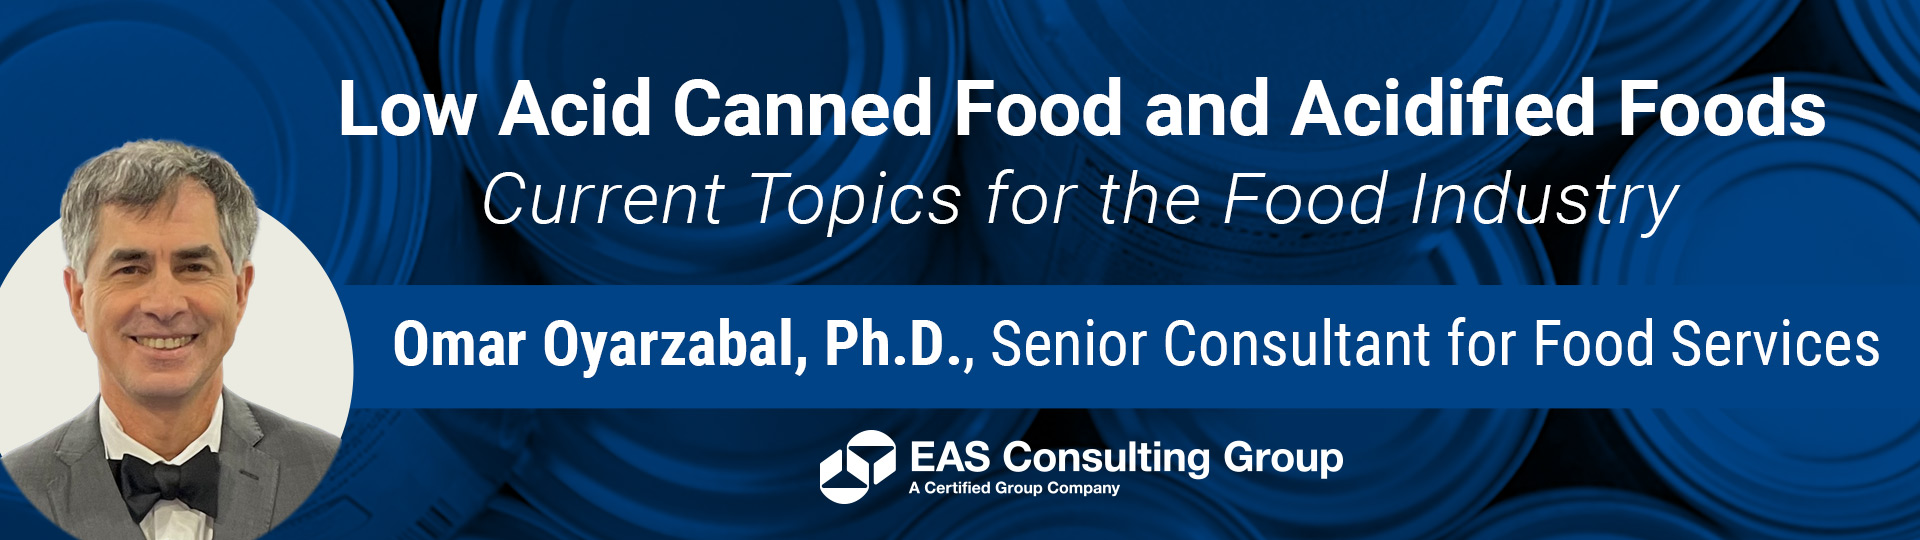 Low Acid Canned Food and Acidified Foods - Current Topics for the Food Industry